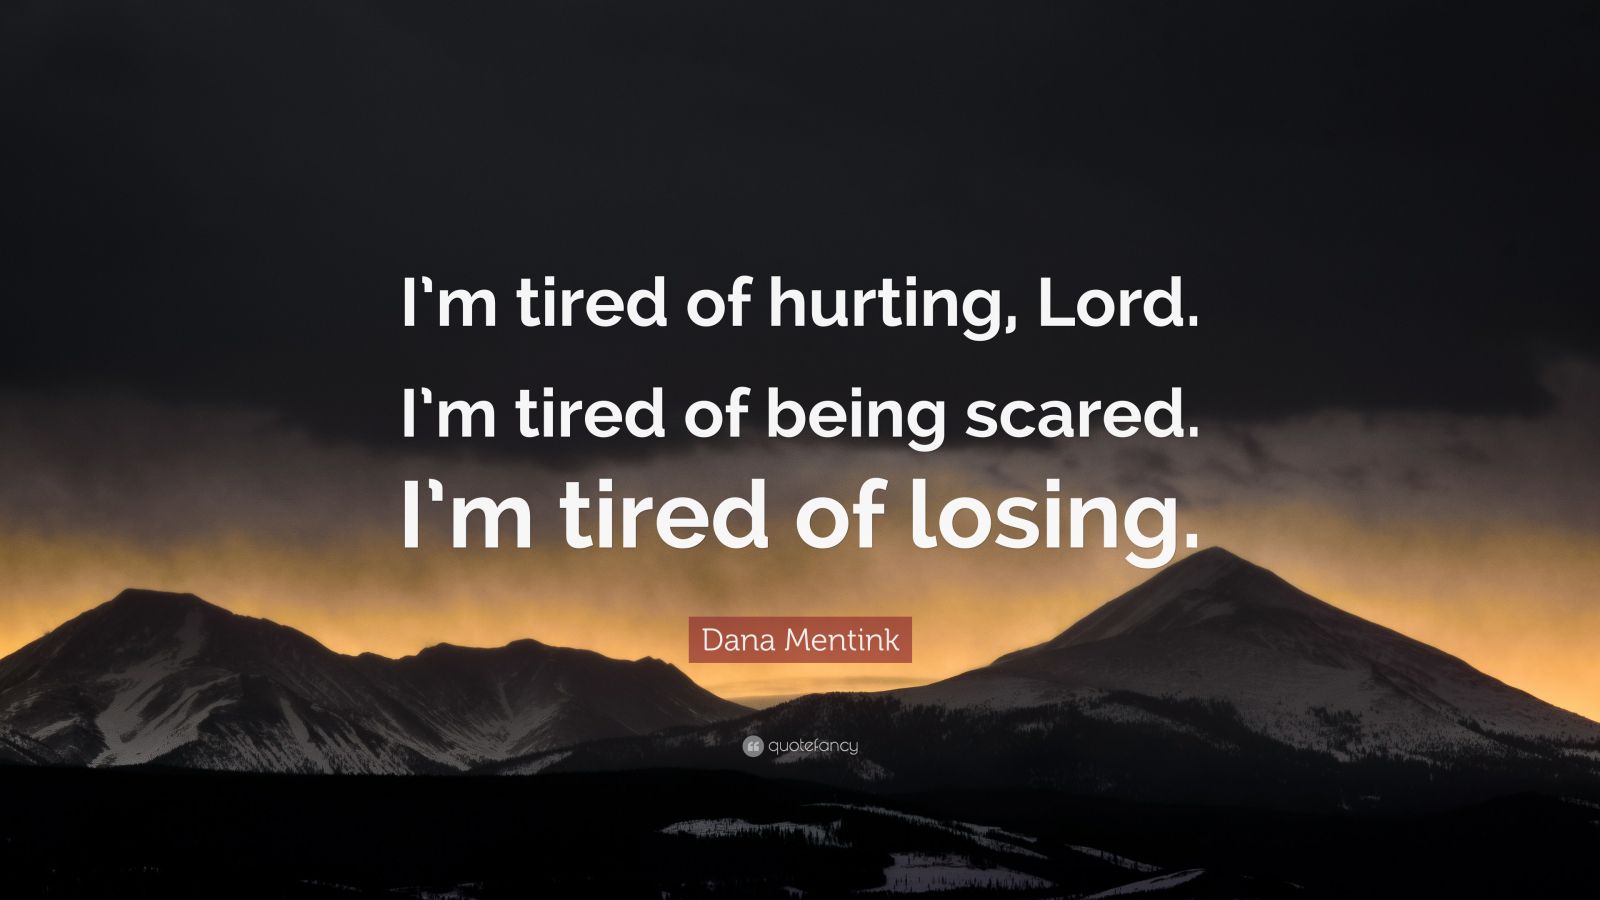 Dana Mentink Quote: “I’m tired of hurting, Lord. I’m tired of being